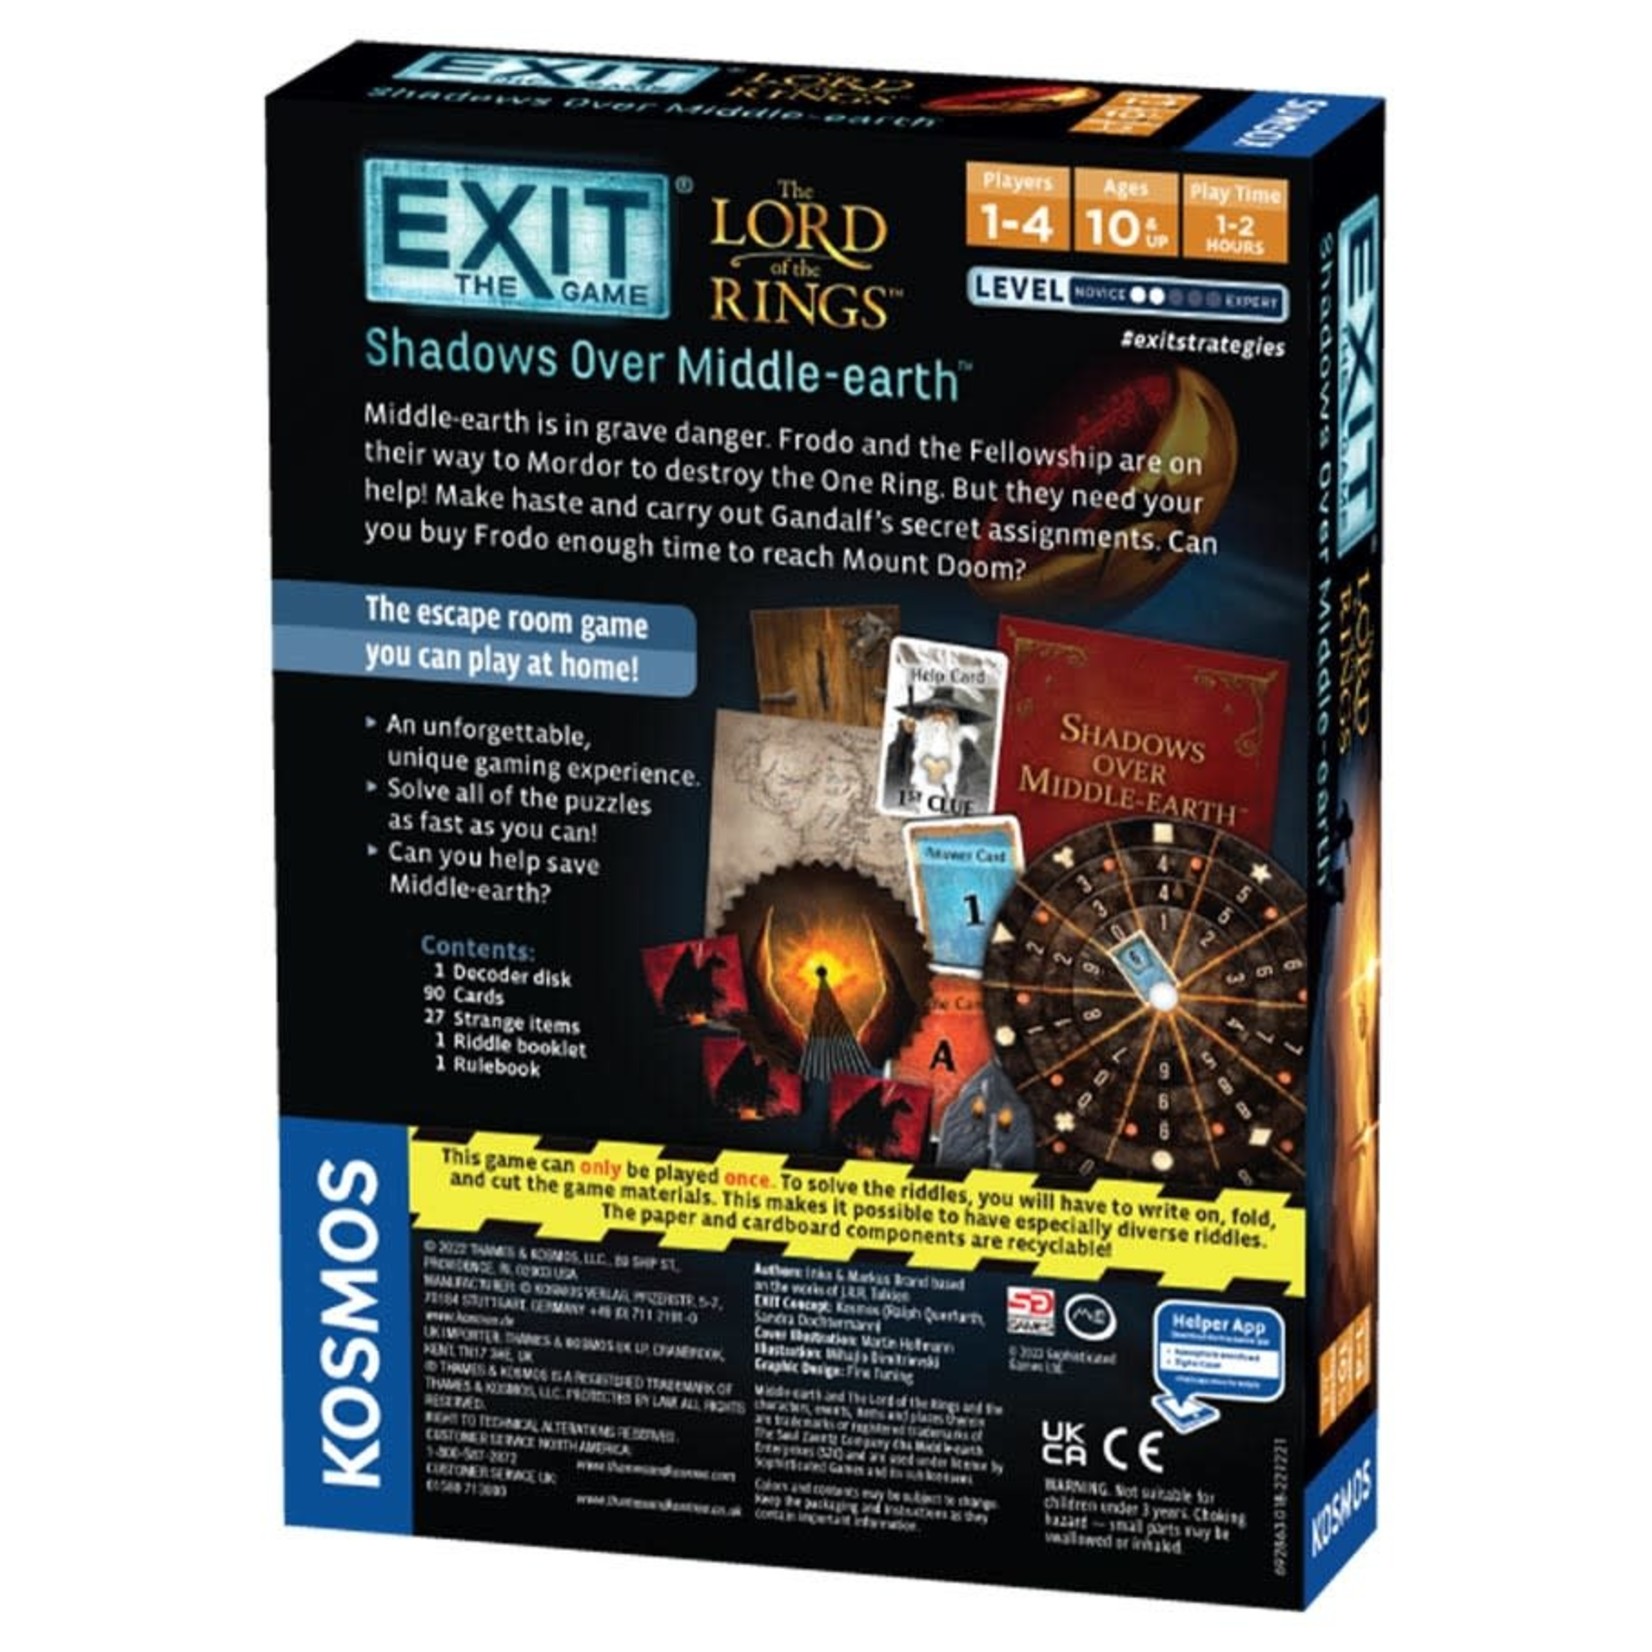 EXIT: LOTR: Shadows Over Middle-earth Lord of the Rings